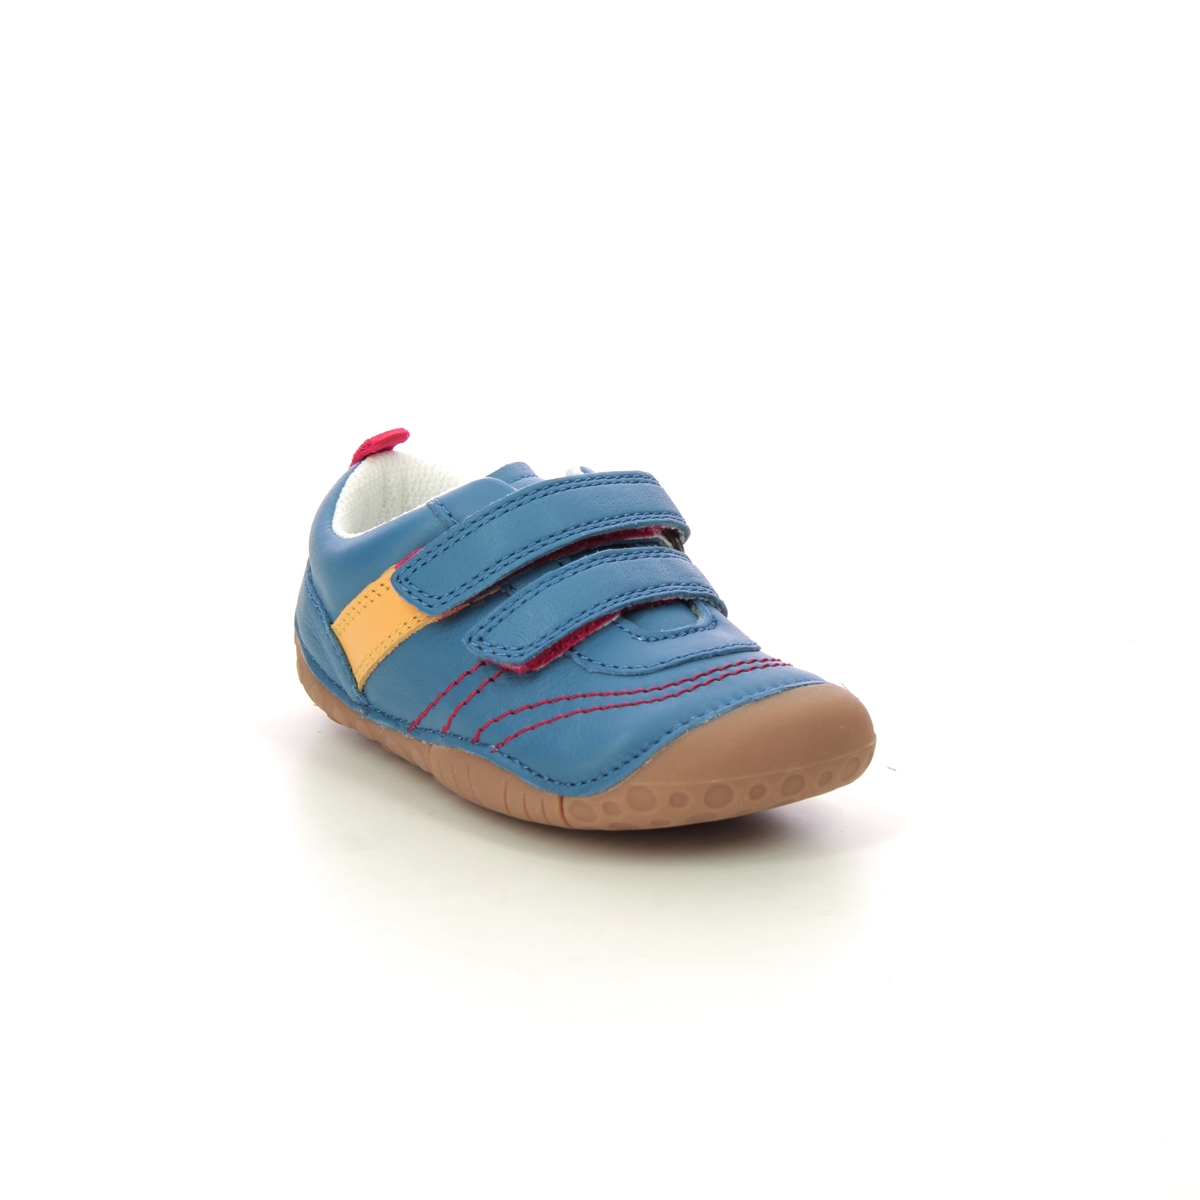 Start Rite Little Smile 2v BLUE LEATHER Kids Boys First Shoes 0823-27G in a Plain Leather in Size 4.5